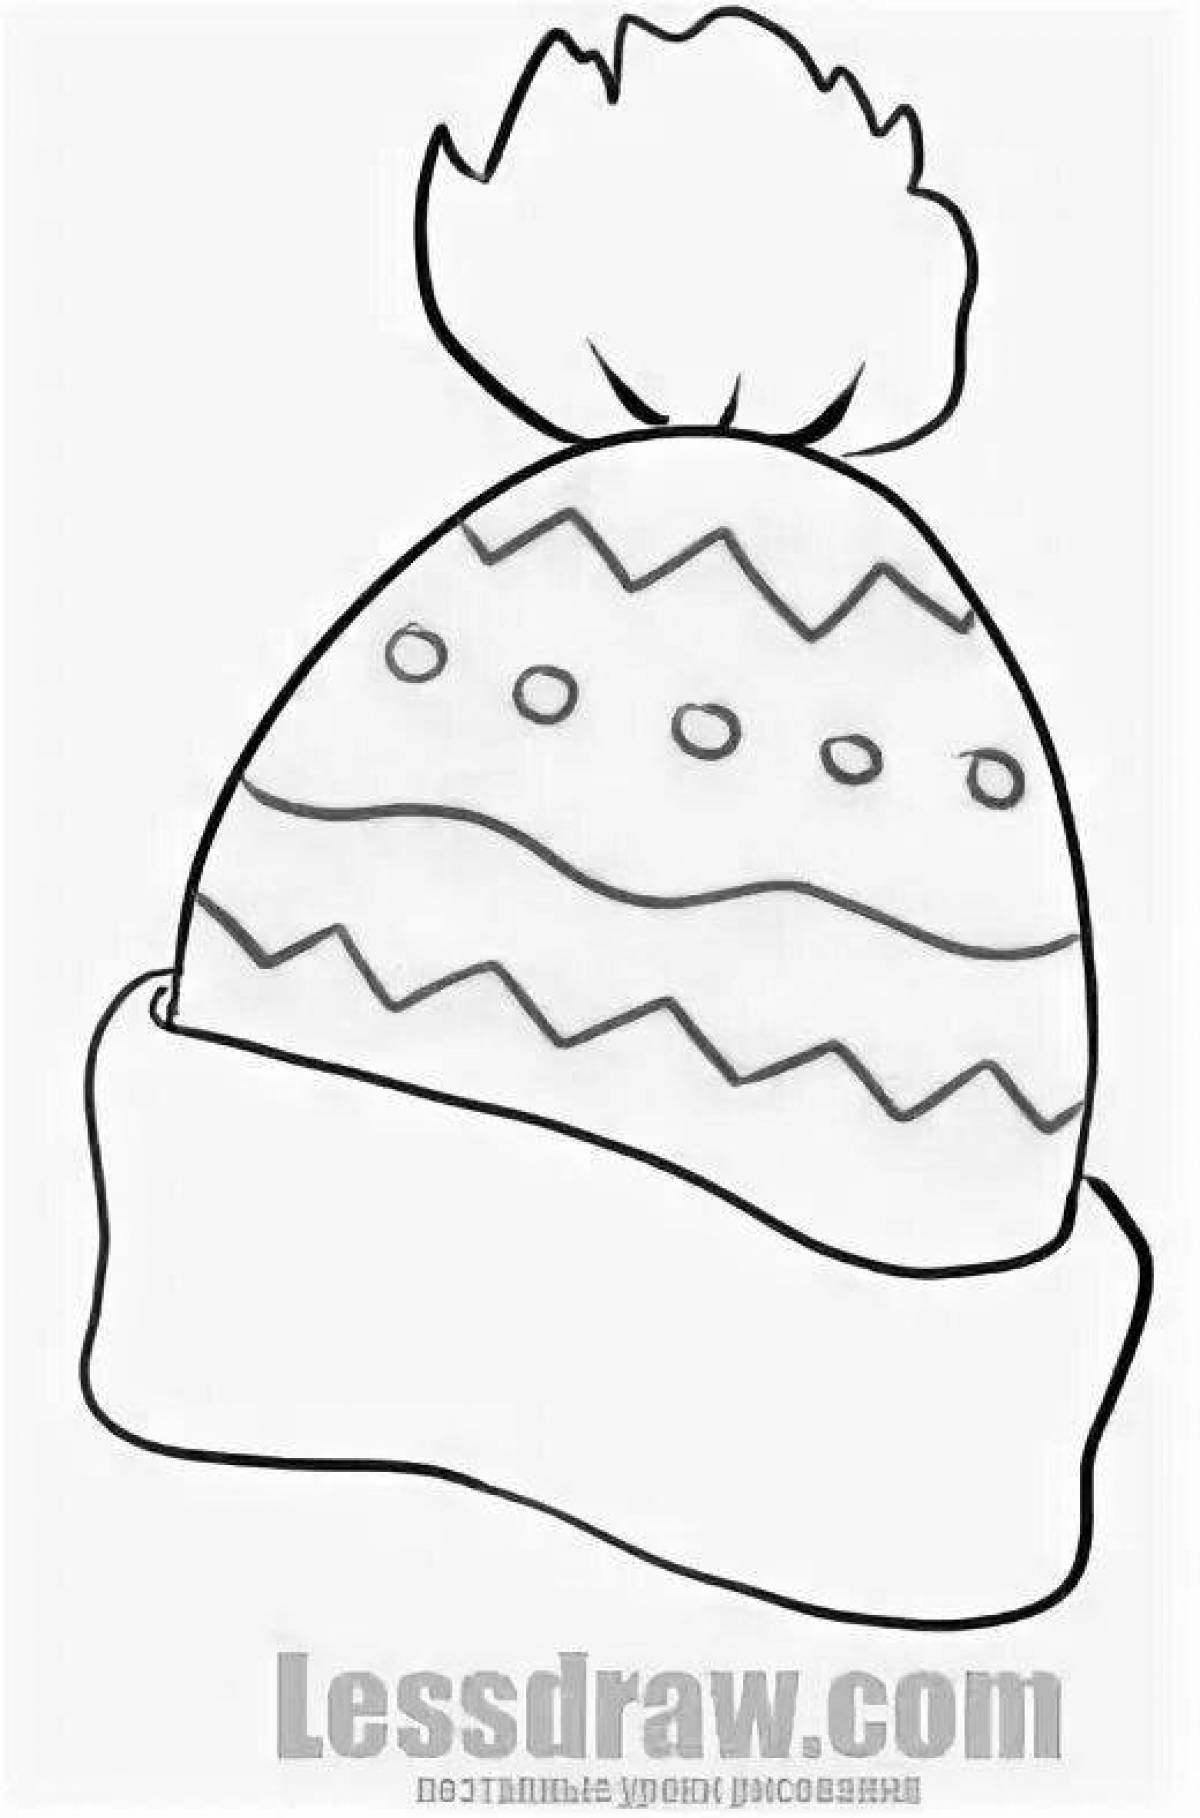 Glowing winter hat coloring page for kids